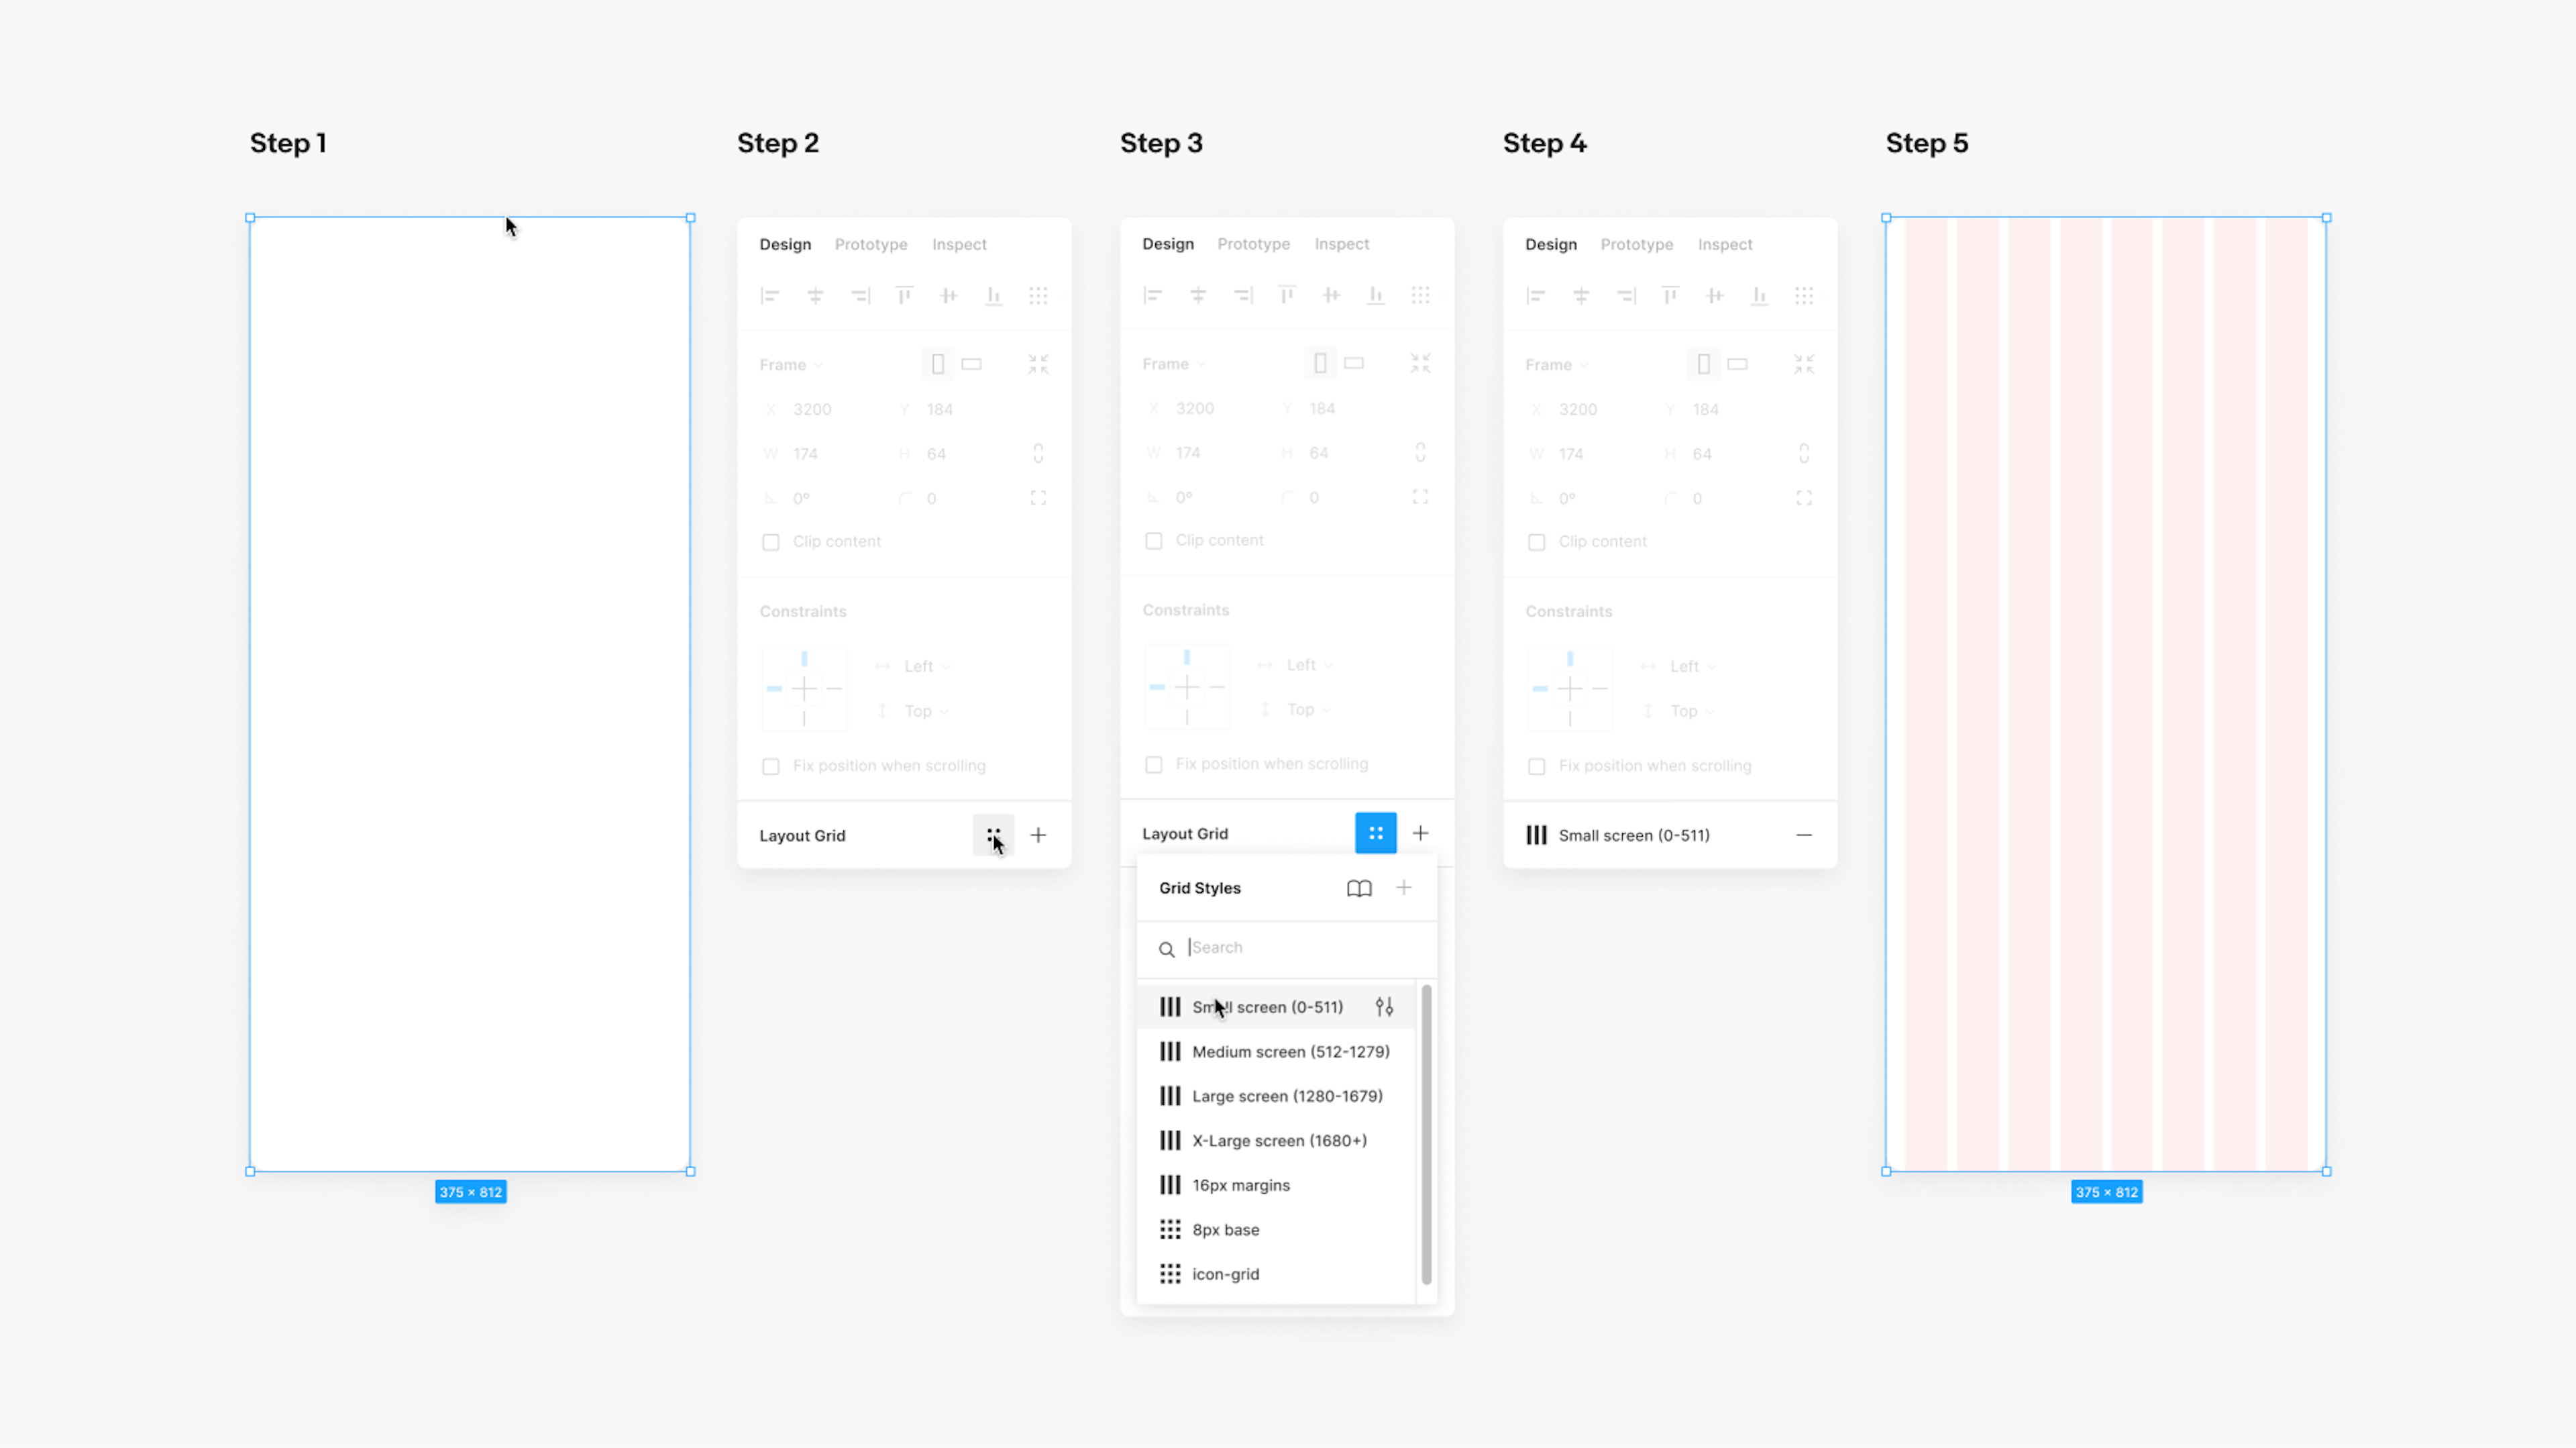 A detailed step-by-step diagram of how to select a grid style in Figma. Step 1 is selecting the frame. Step 2 is selecting the layout grid icon that looks like 4 circles in a grid. Step 3 is selecting a grid preset from the dropdown. In this case it is the “Small screen (0-511) preset. Step 4 shows the grid selected in the UI. Step 5 shows the pink 8-column grid preset on a frame the size of a mobile screen.